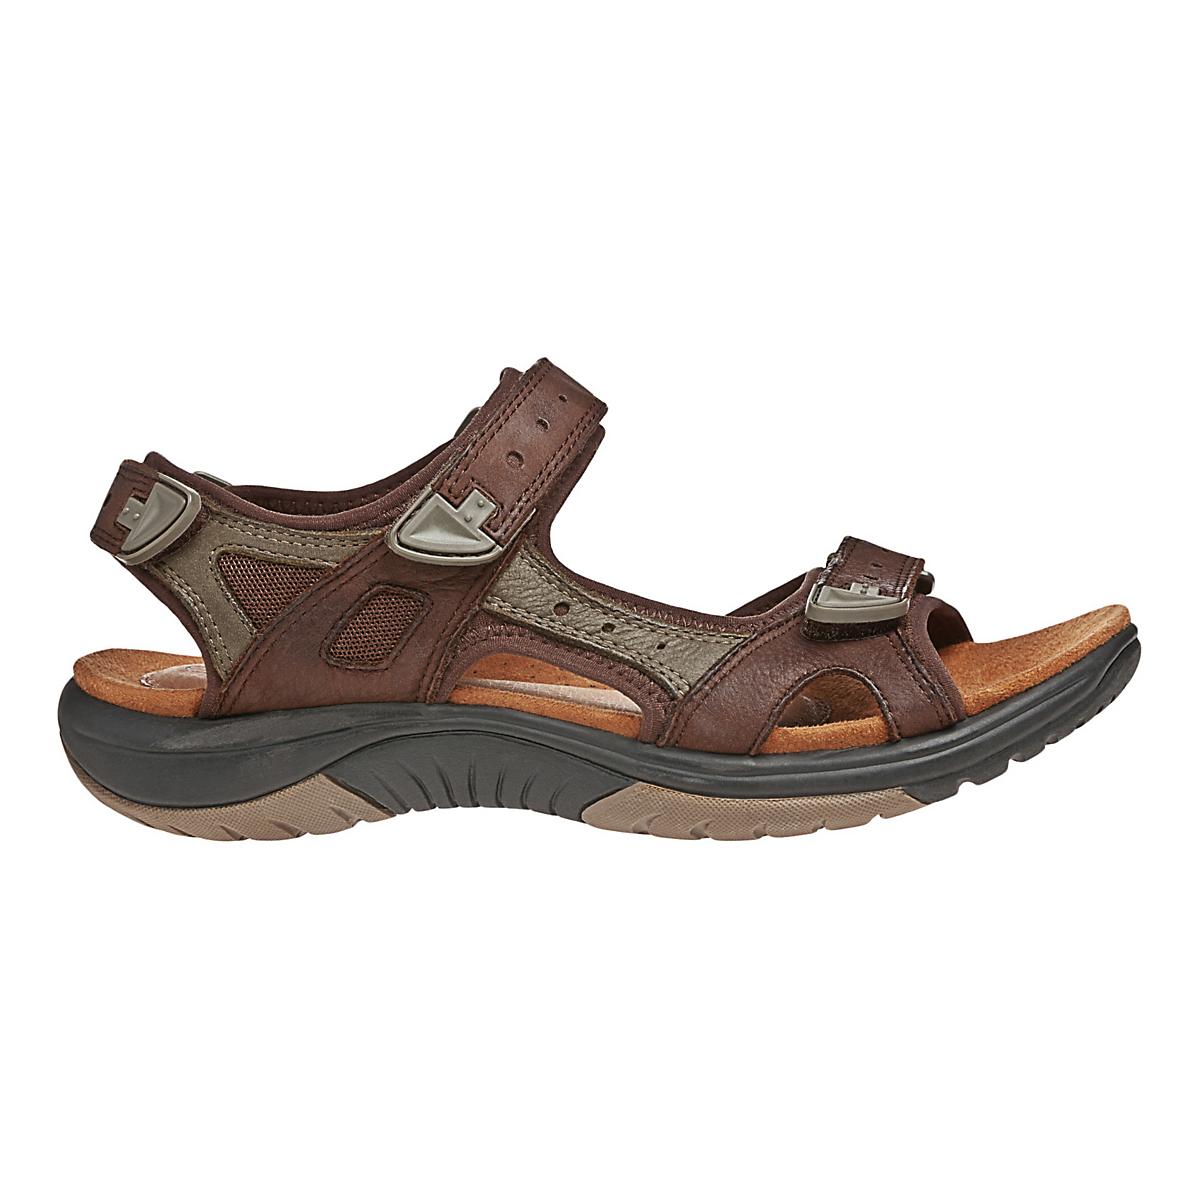 Womens Cobb Hill Fiona Sandals Shoe at Road Runner Sports